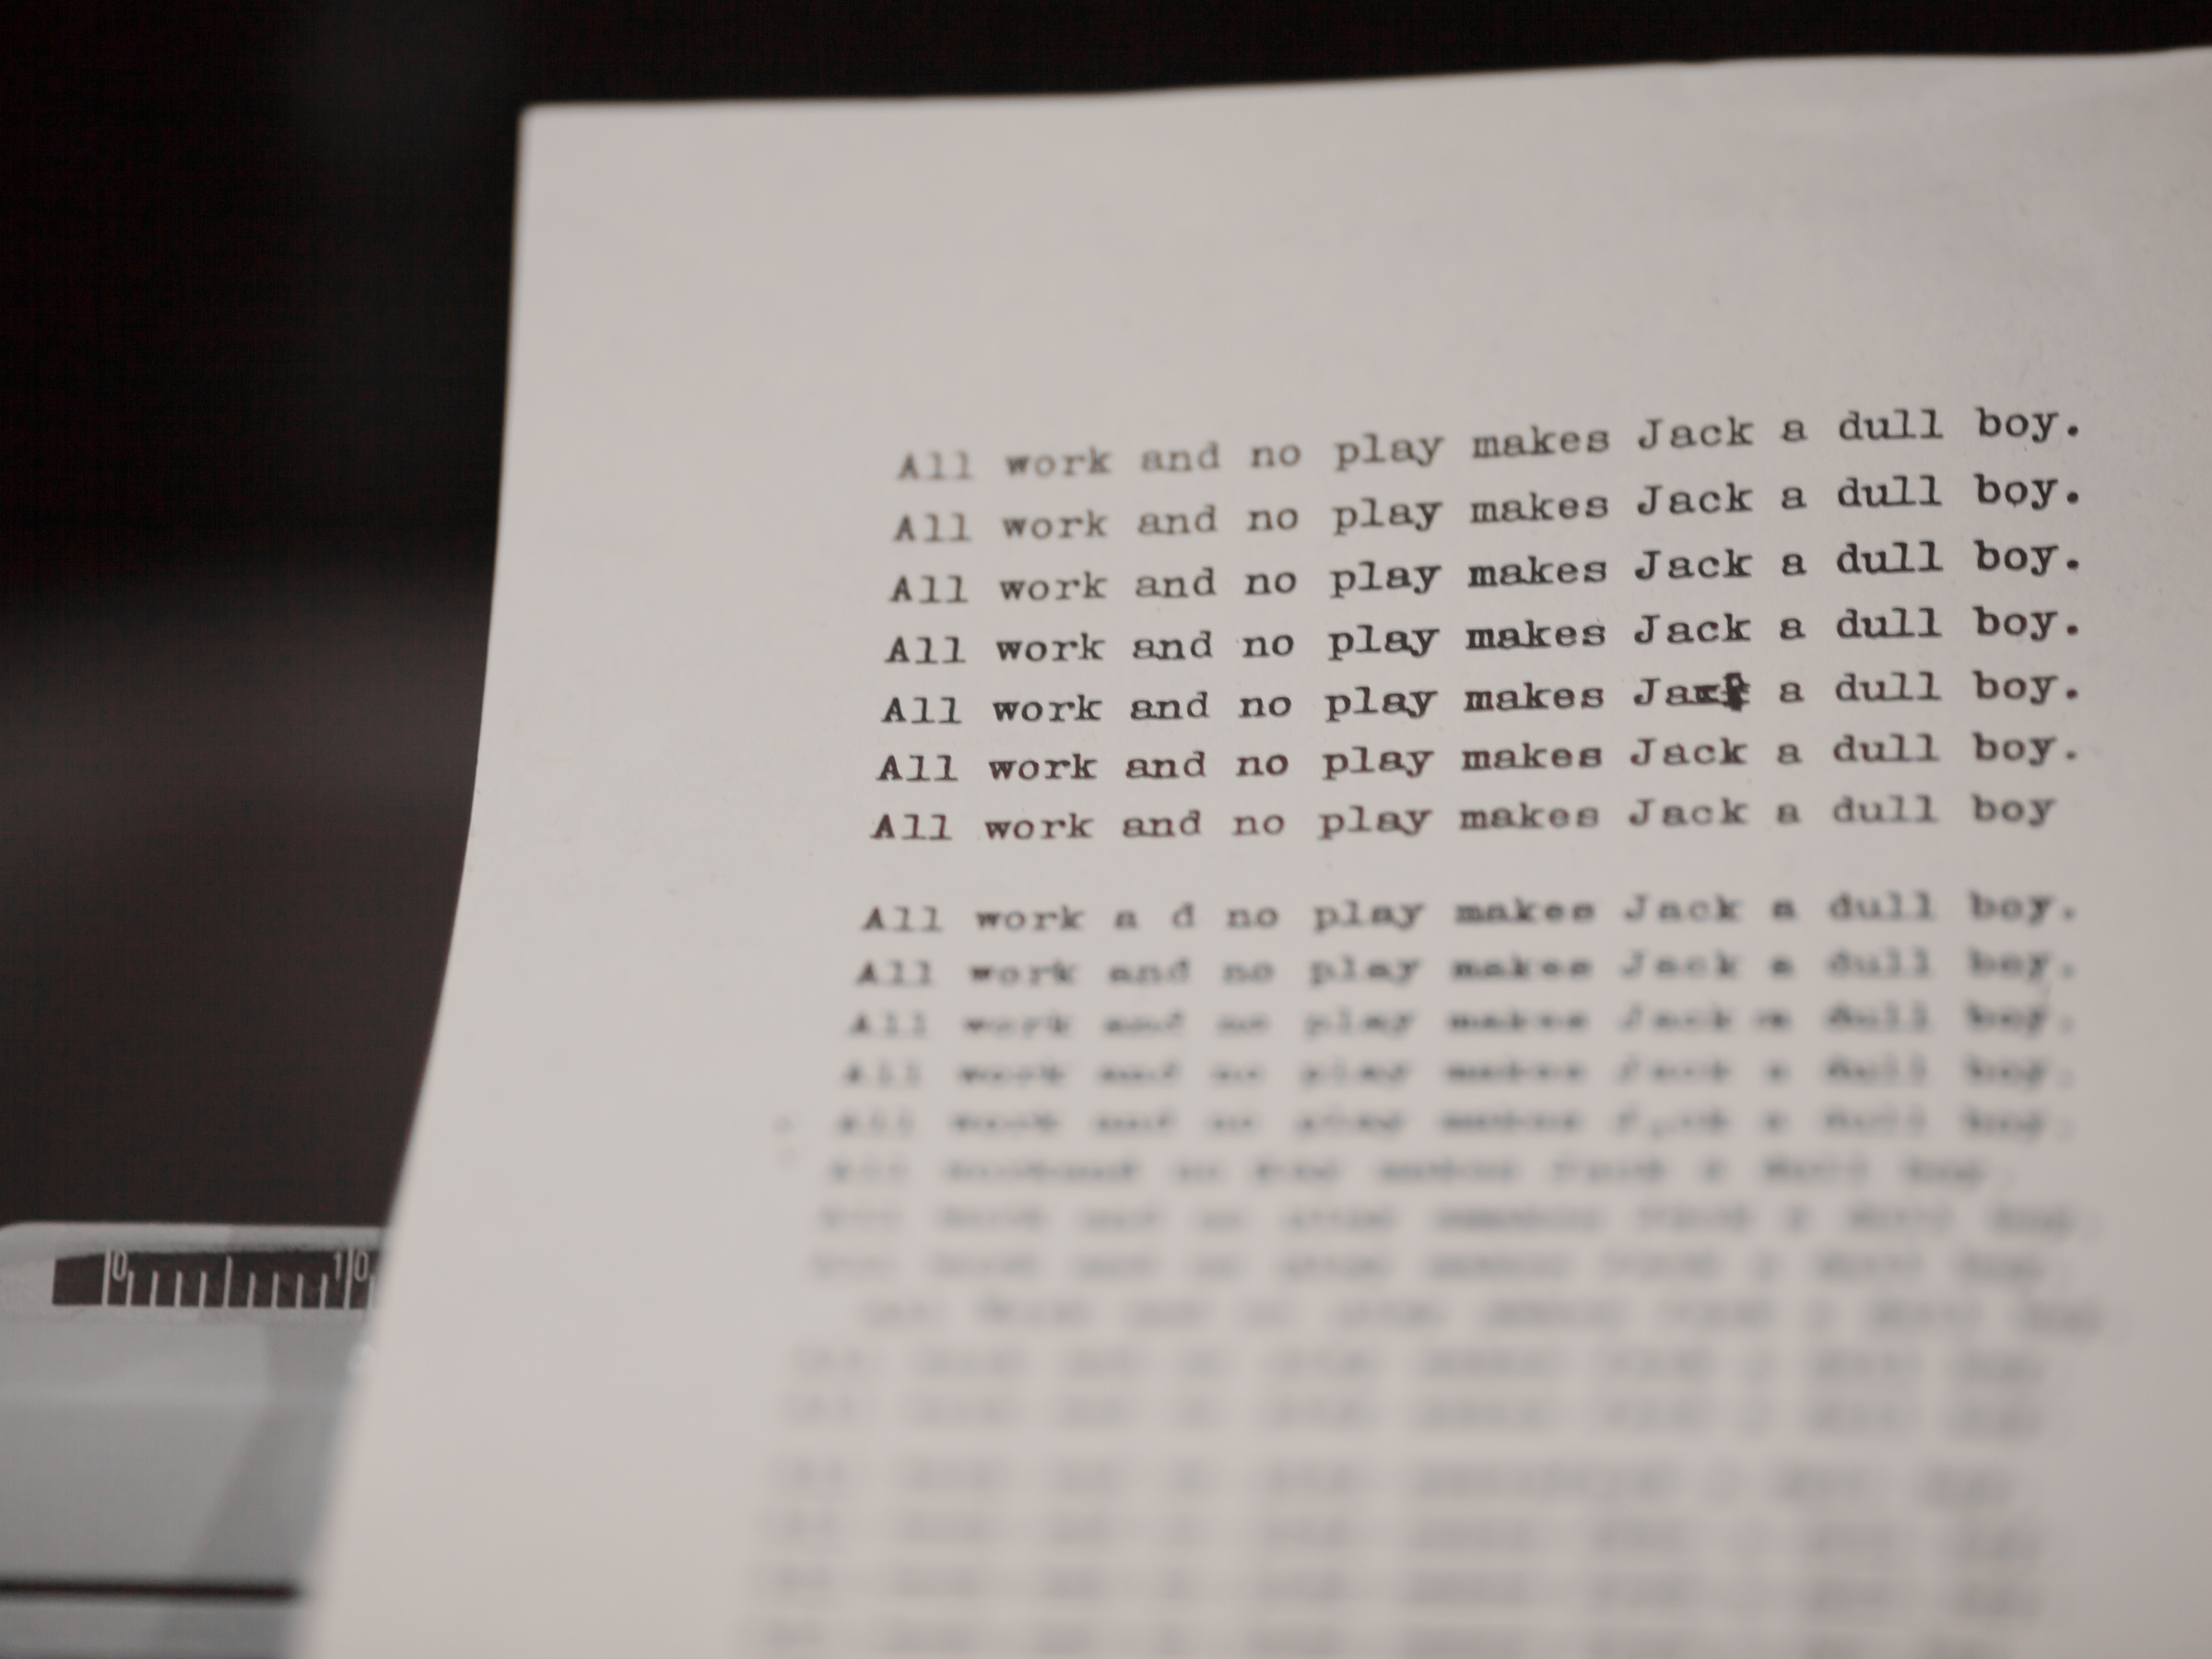 A page in a typewriter with the words "All work and no play makes Jack a dull boy" from the movie The Shining.